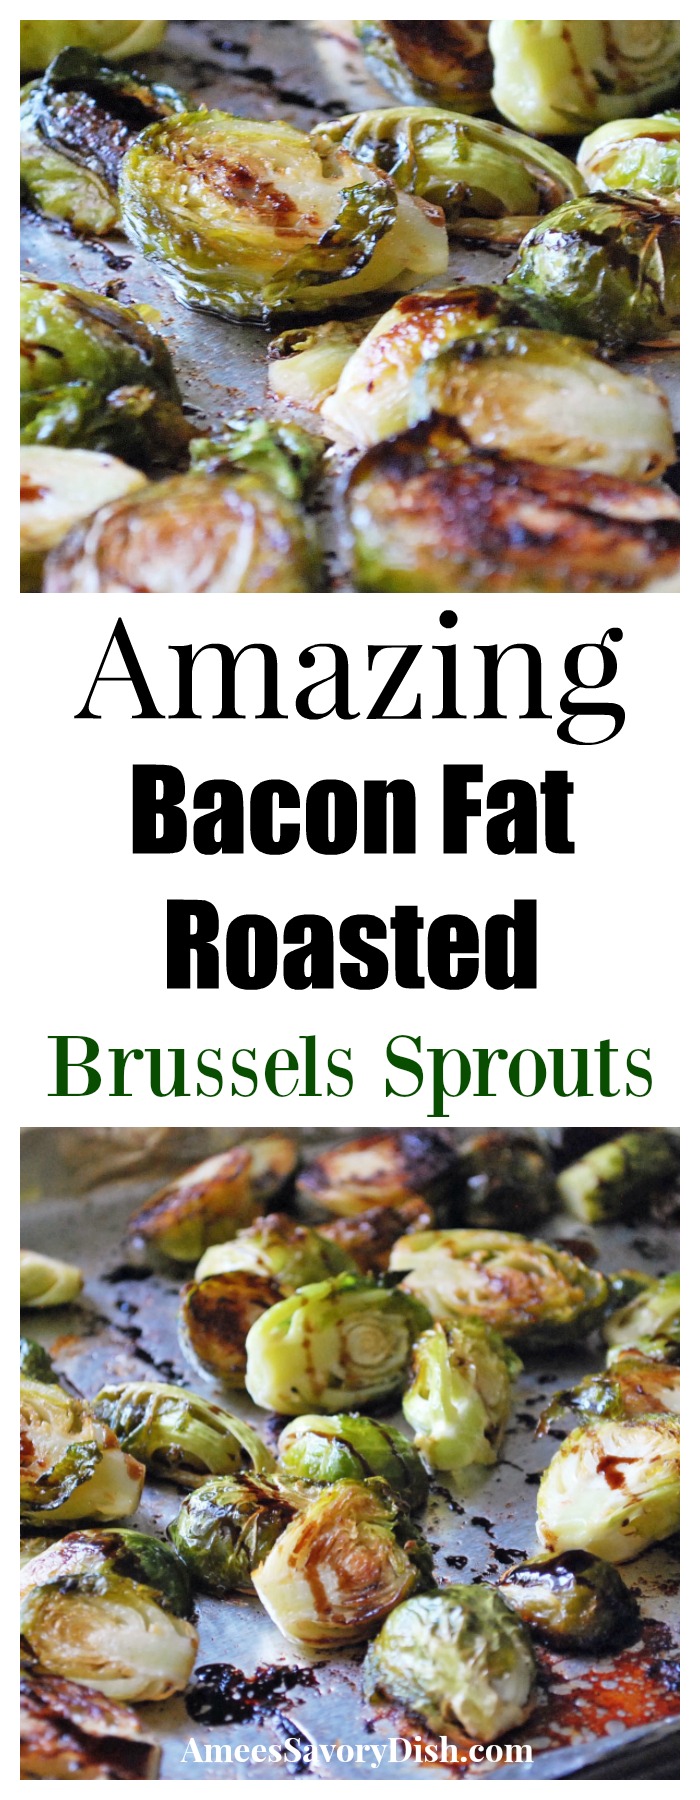 Fresh brussels sprouts are roasted in bacon fat and olive oil and finished with a balsamic glaze. The easy side dish recipe is a winner! via @Ameessavorydish